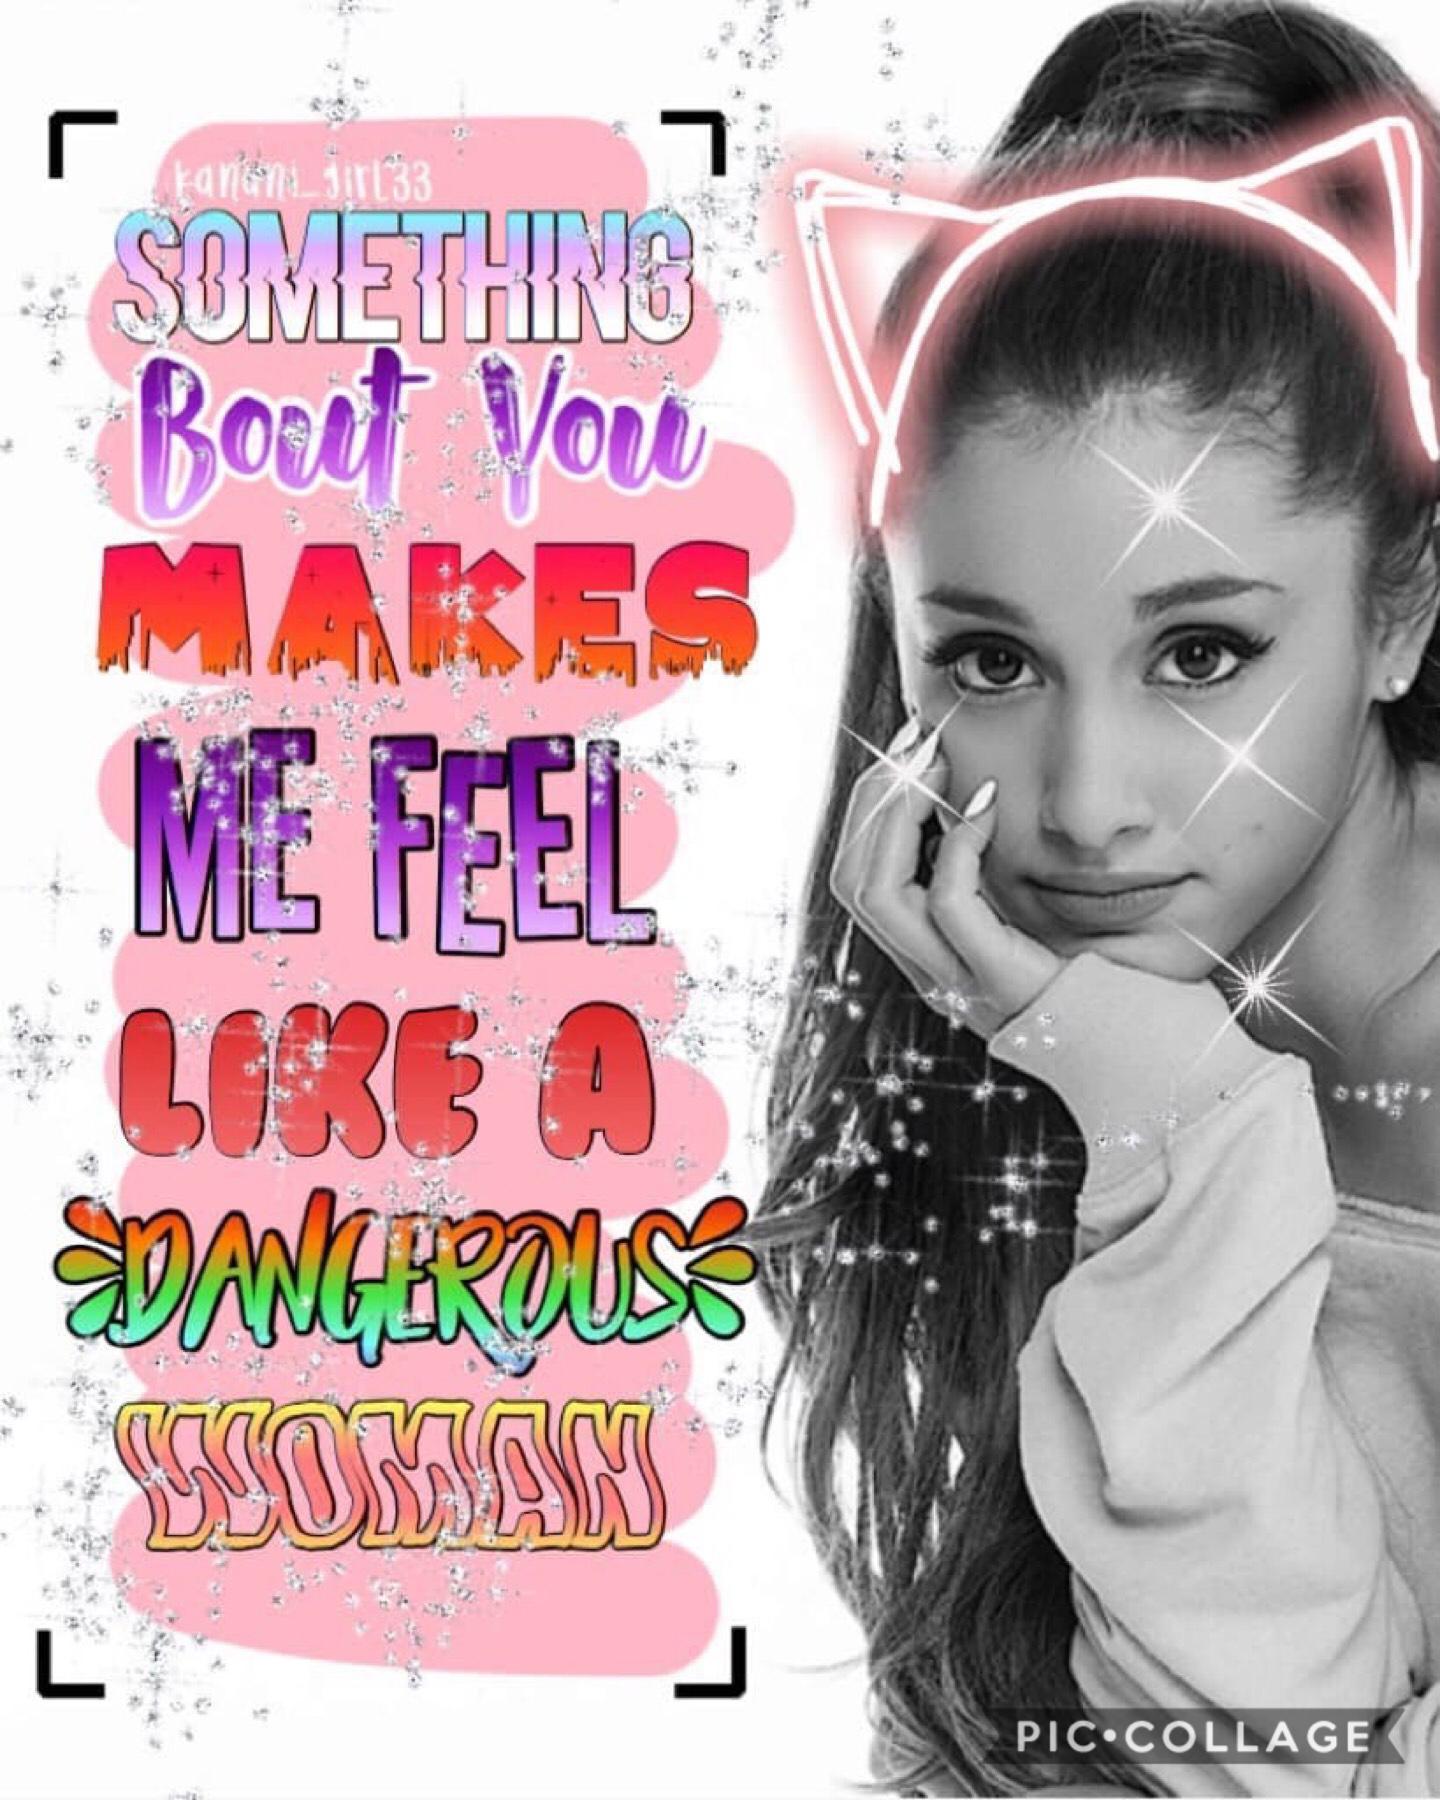 This is for @Madihah456’s games! What do you think? Rate /10. Qotd: which celebrity would you ship Ariana Grande with? 